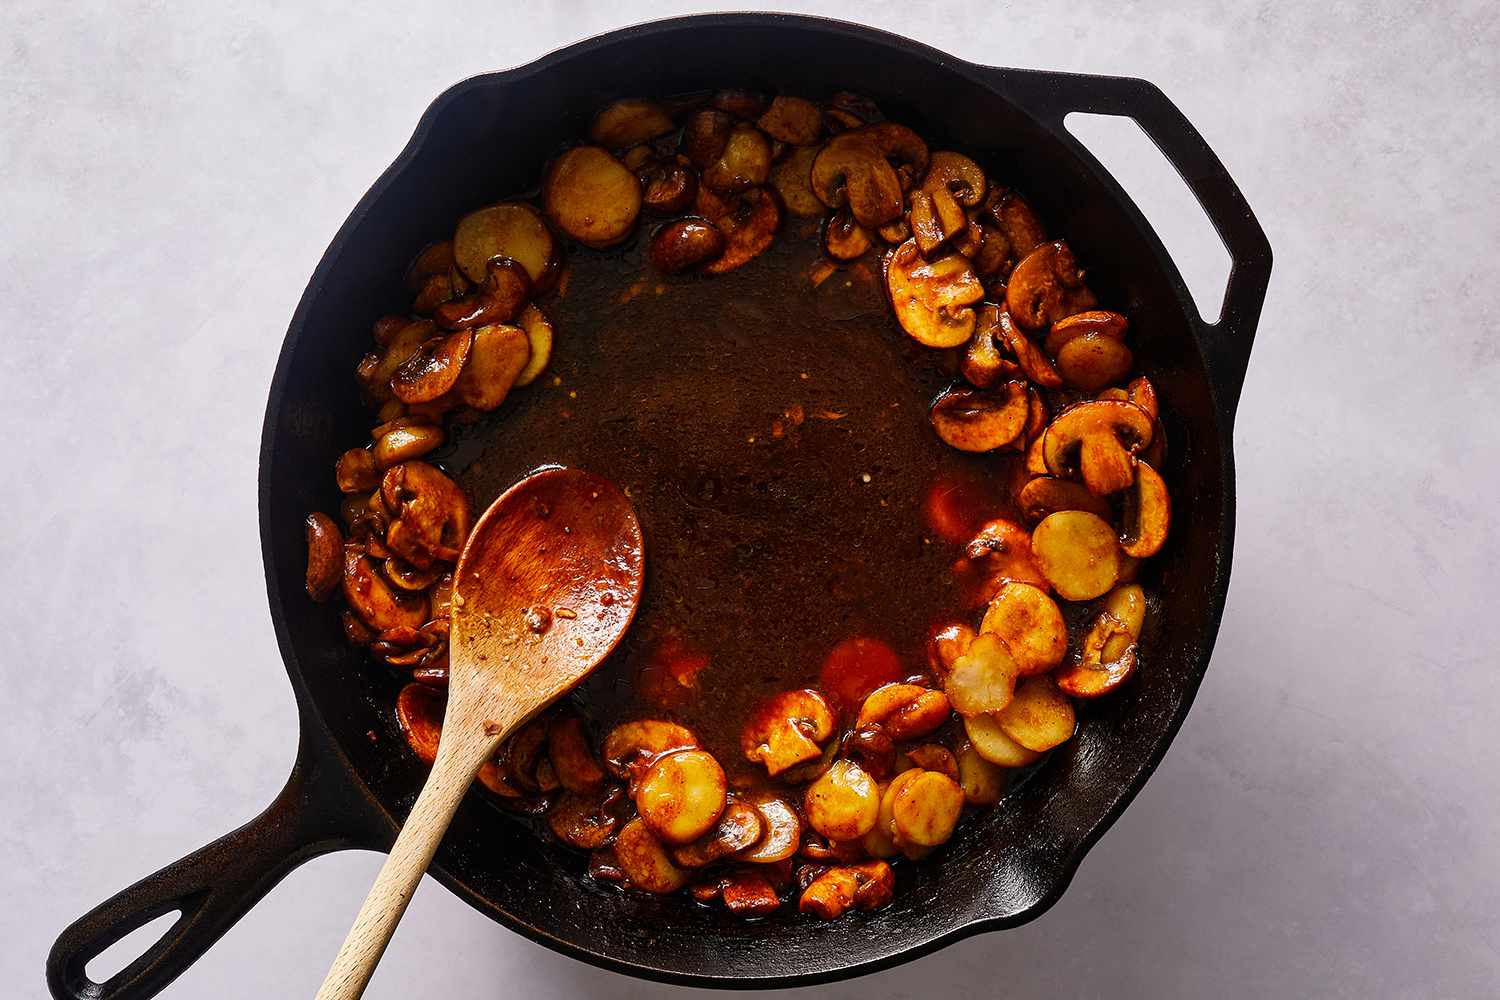 Mater chestnuts, mushrooms and sauce in a cast iron skillet, with a wooden spoon 